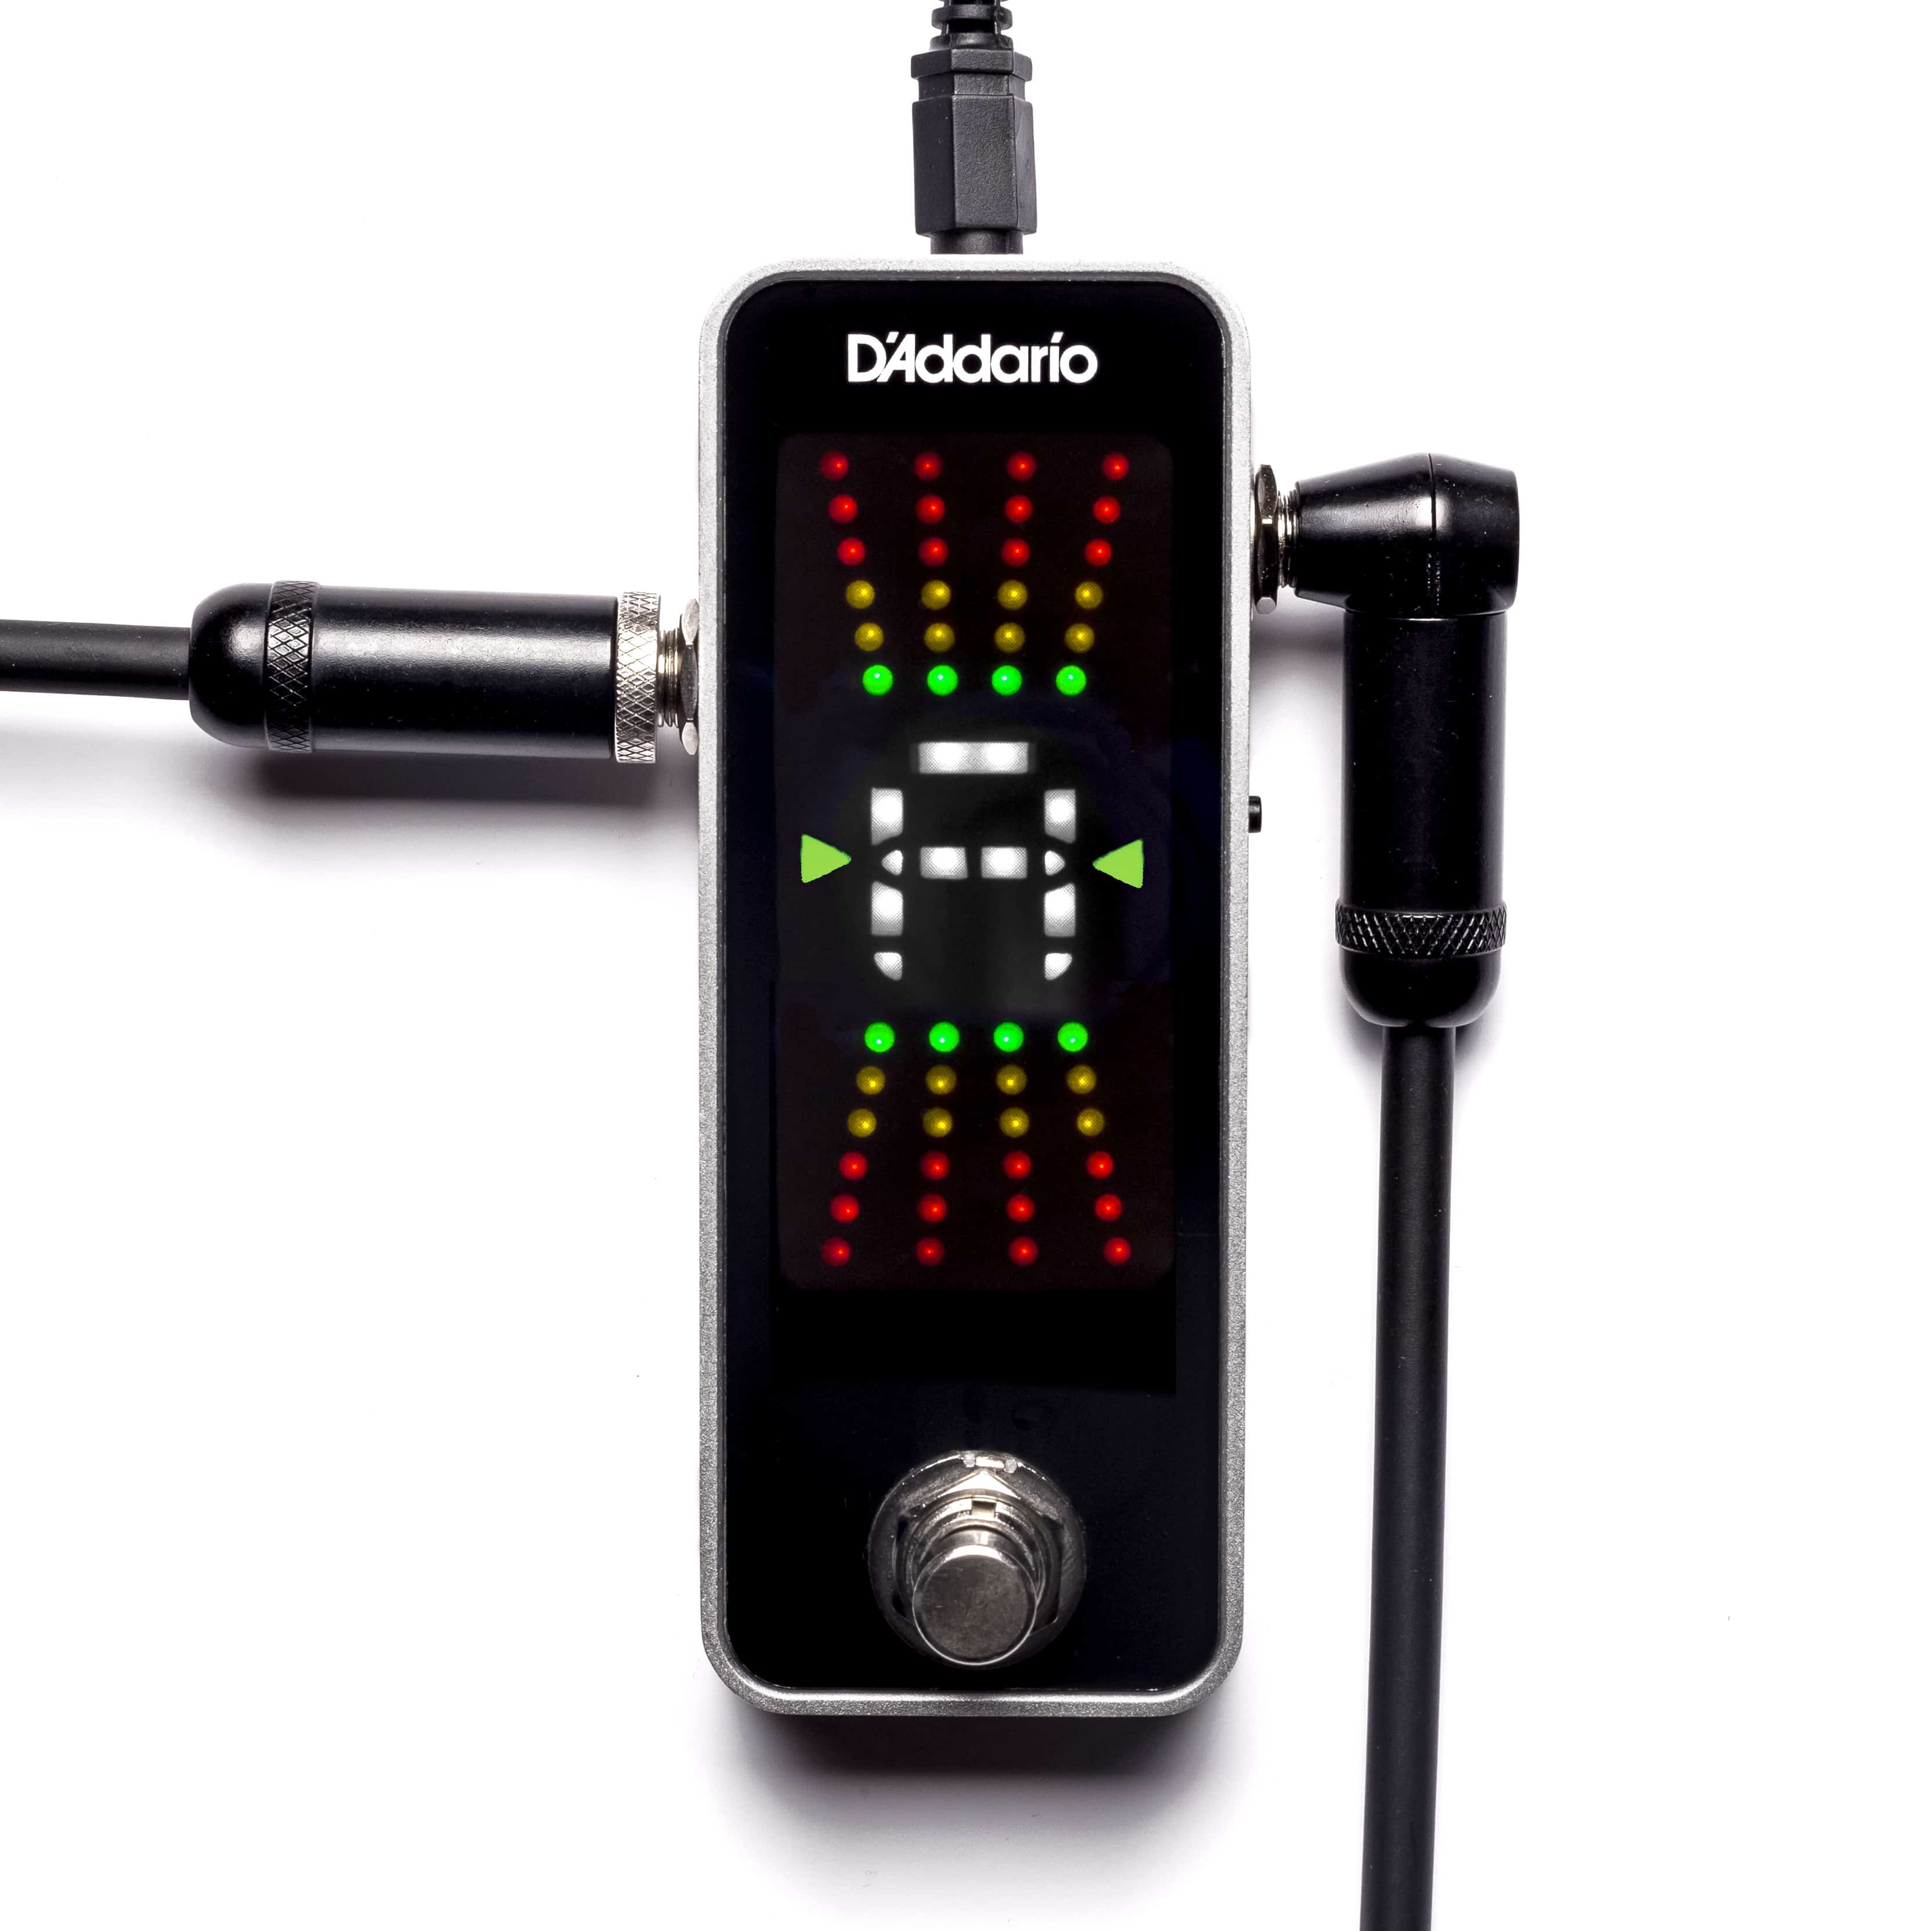 D’Addario Accessories Launches First-Ever Pedal Tuner